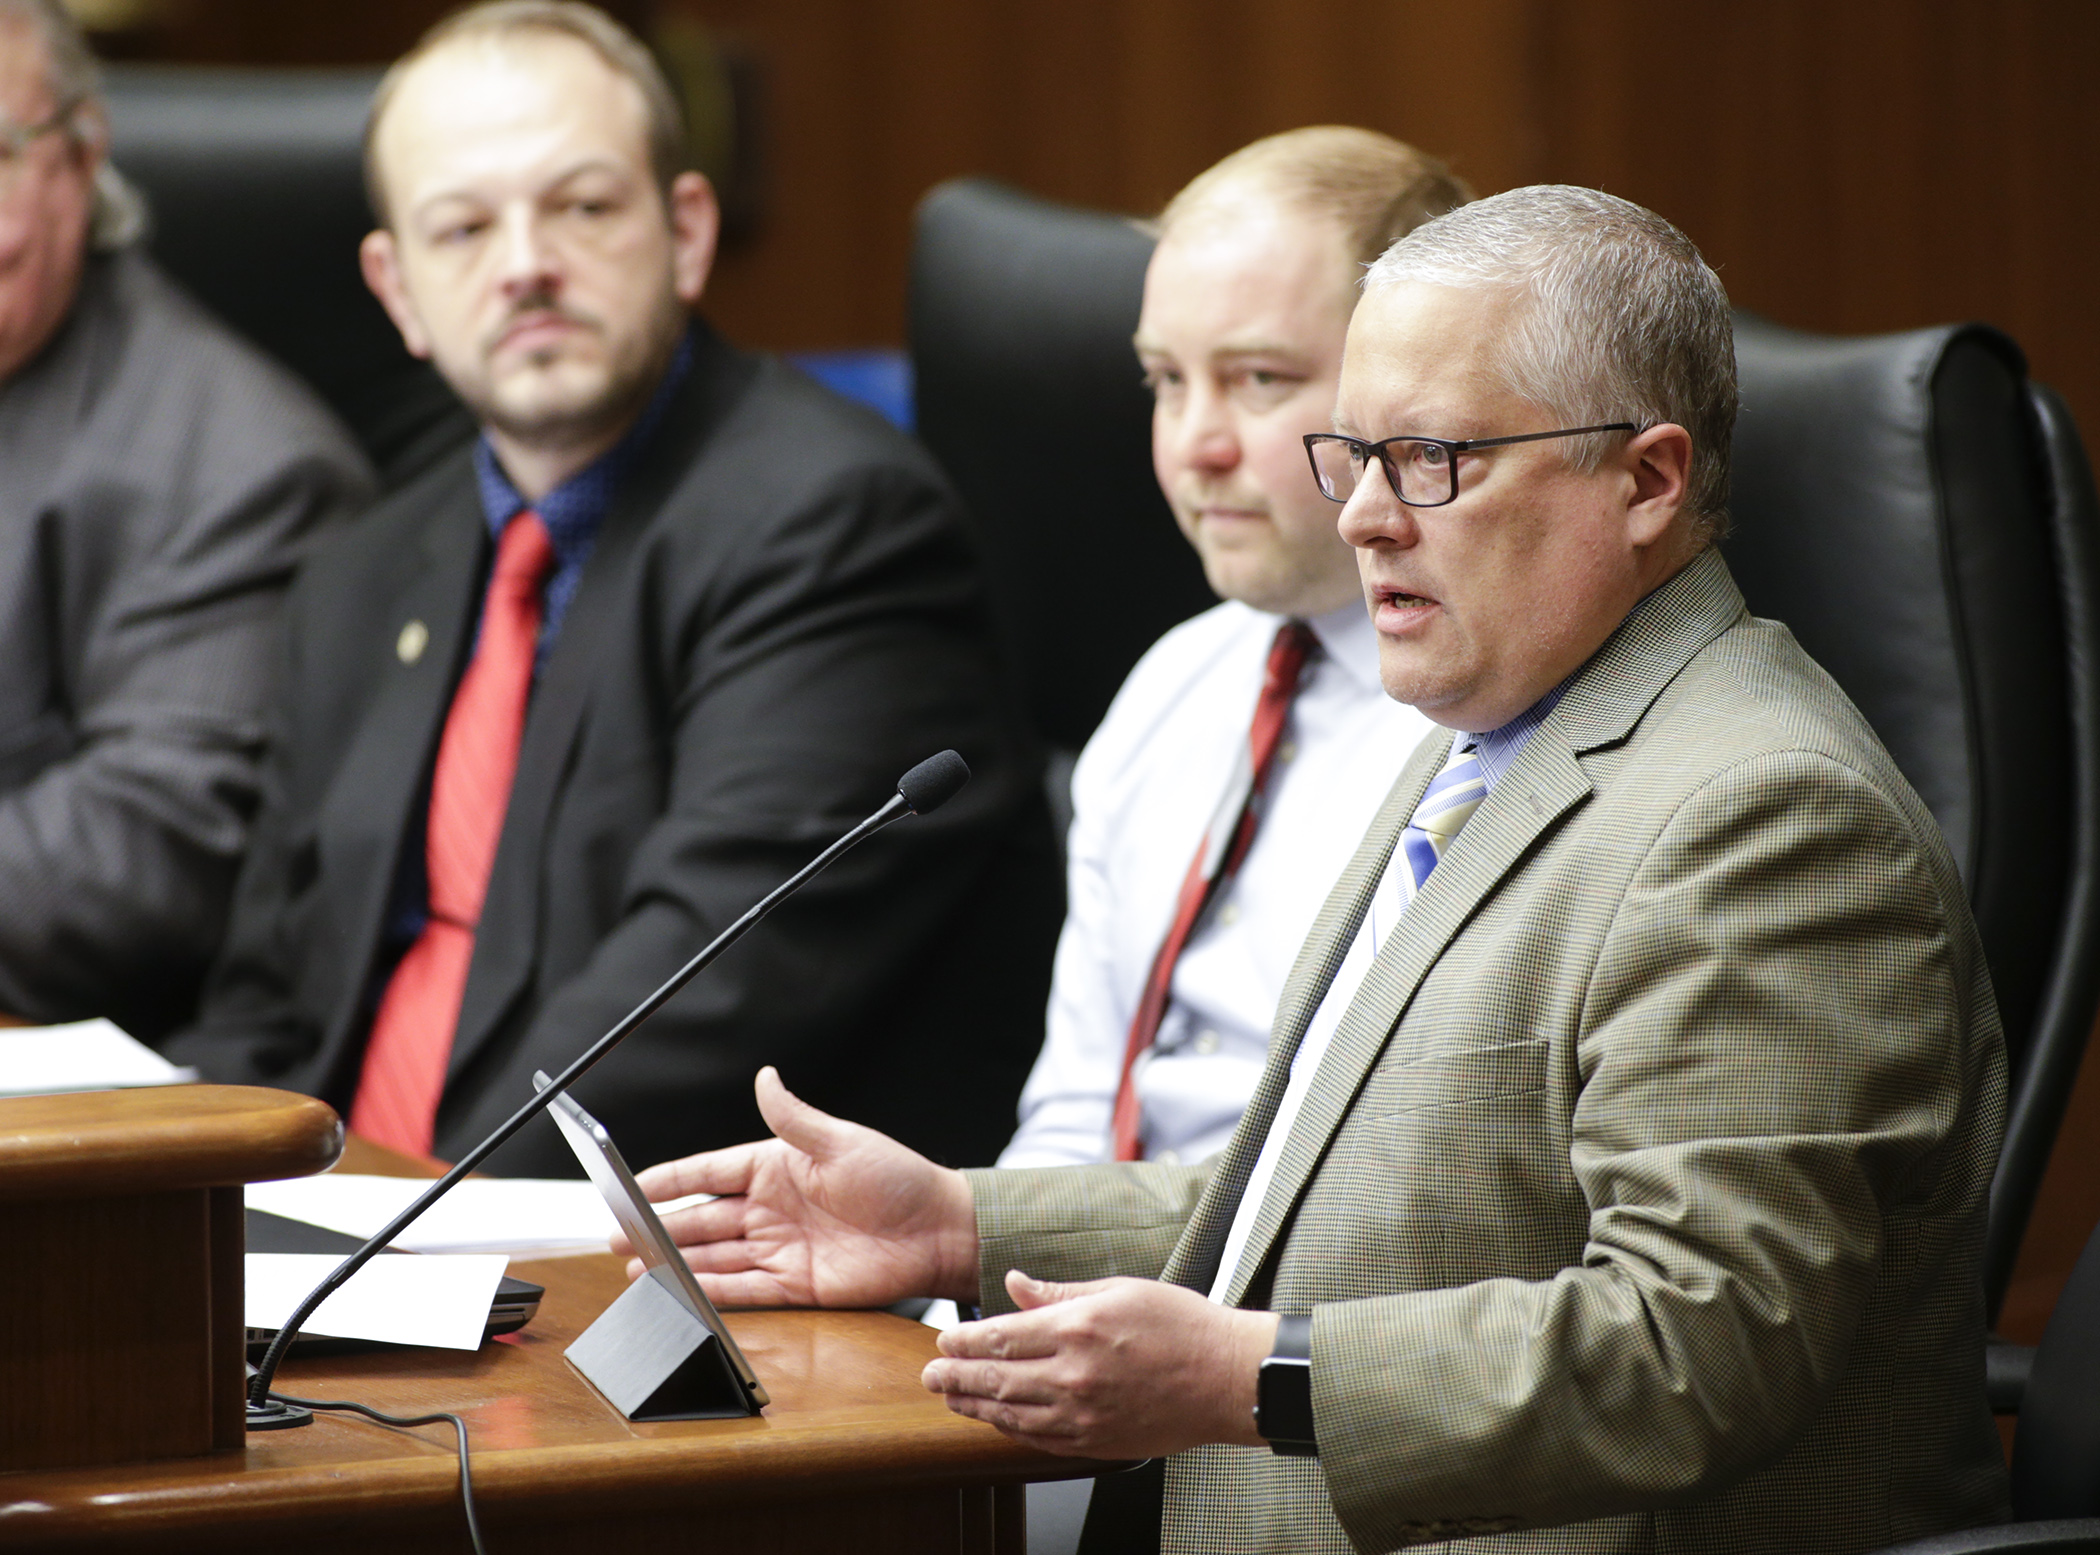 Scott Carlson, executive director of the Farmers’ Legal Action Group, testifies Jan. 31 on HF158, sponsored by Rep. Jeff Brand, left, which would provide funding for the nonprofit organization. Photo by Paul Battaglia